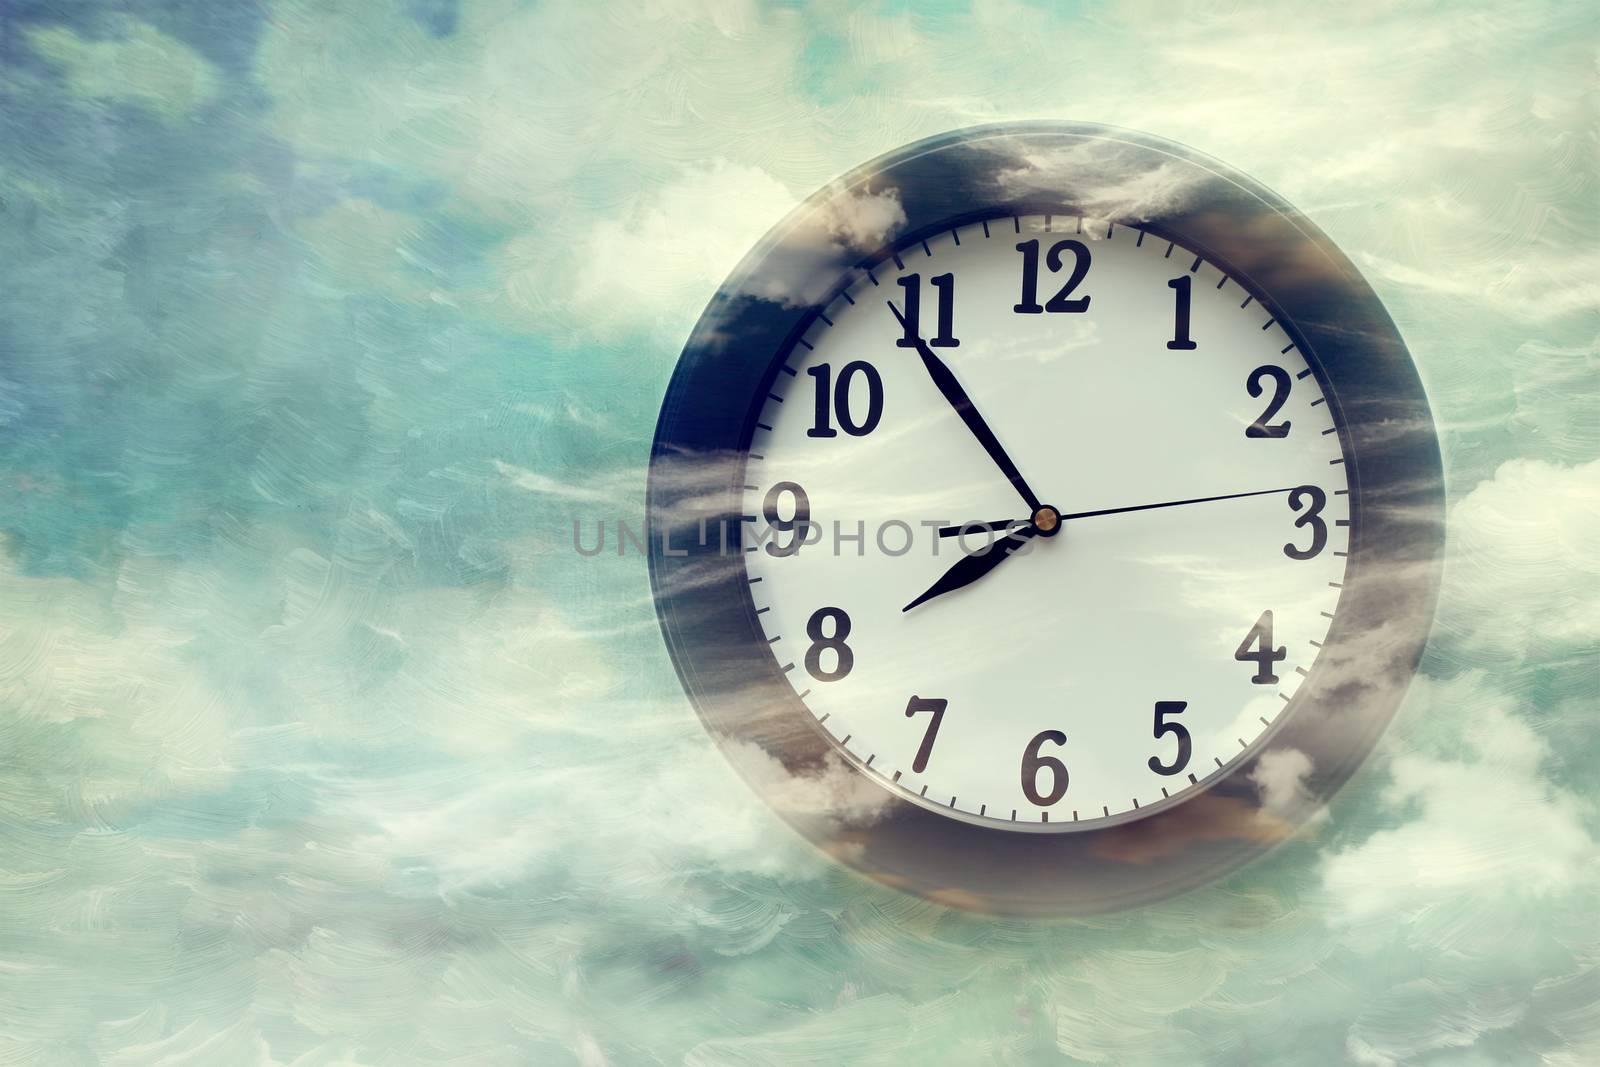 Wall clock on surreal background by Sandralise